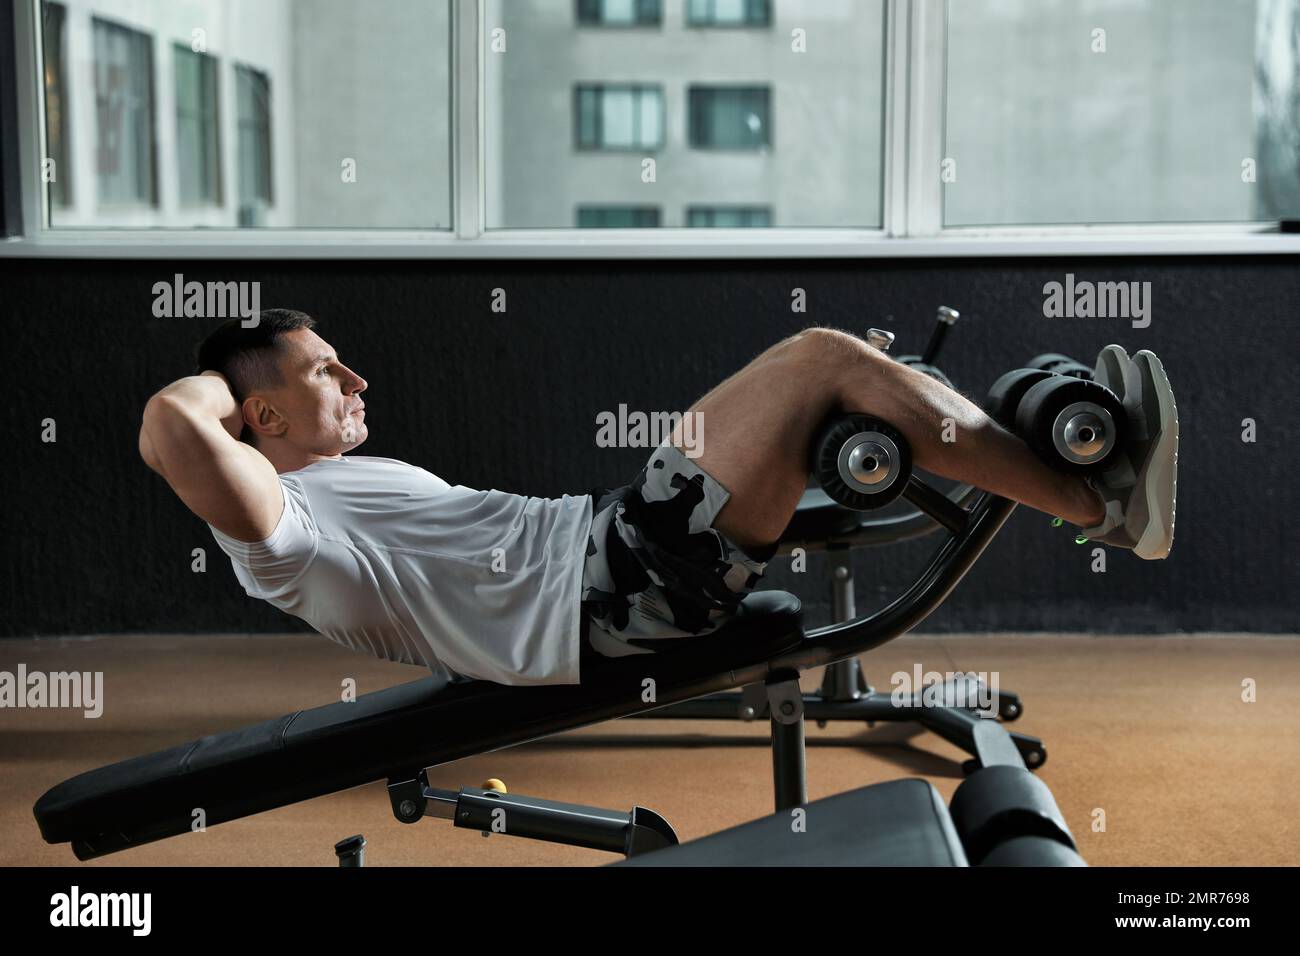 Man working out on adjustable sit up bench in modern gym Stock